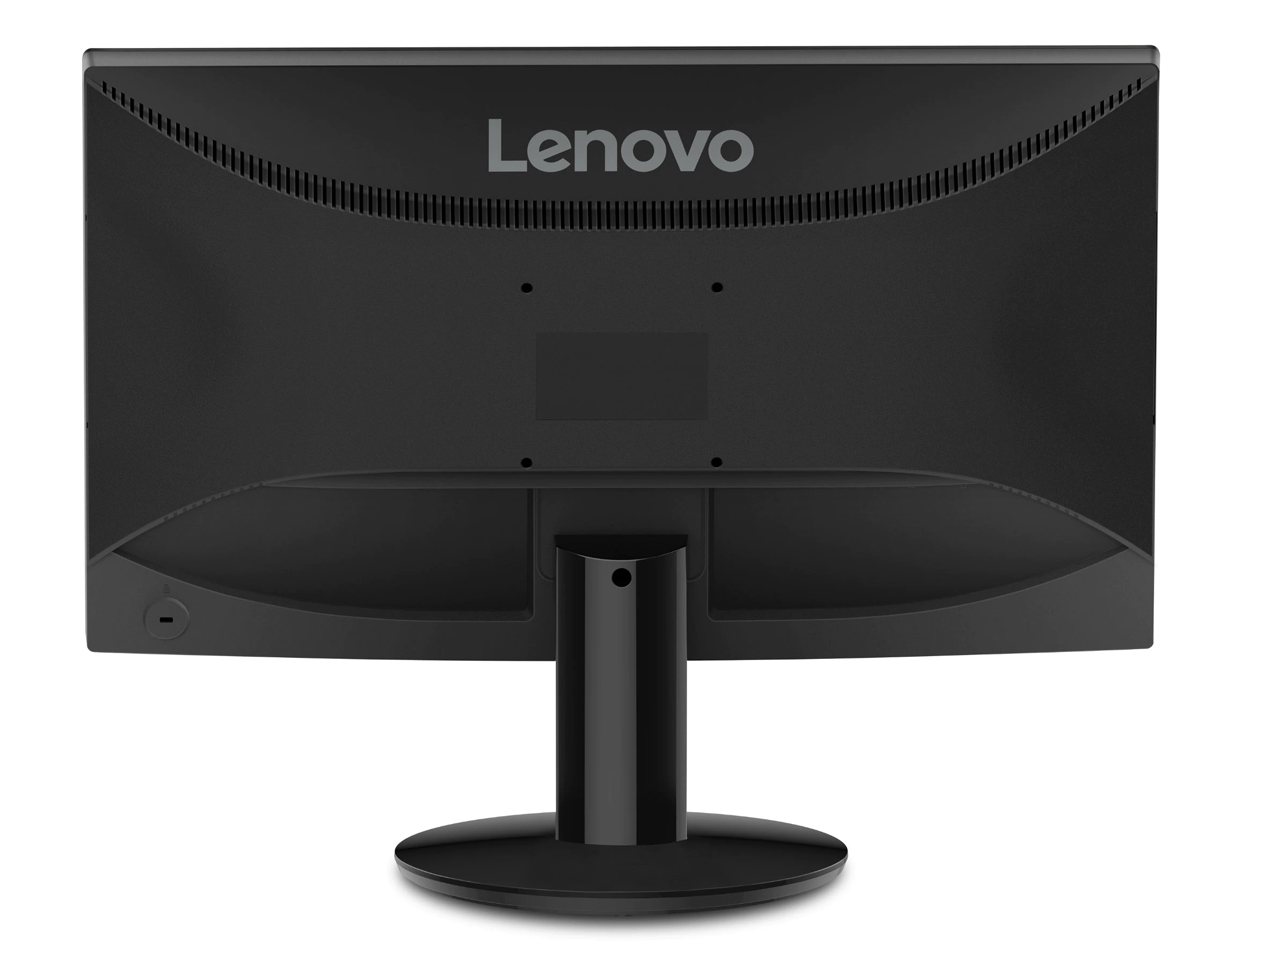 the back of the Lenovo D24f-10 23.6-inch LED Backlit LCD Gaming Monitor